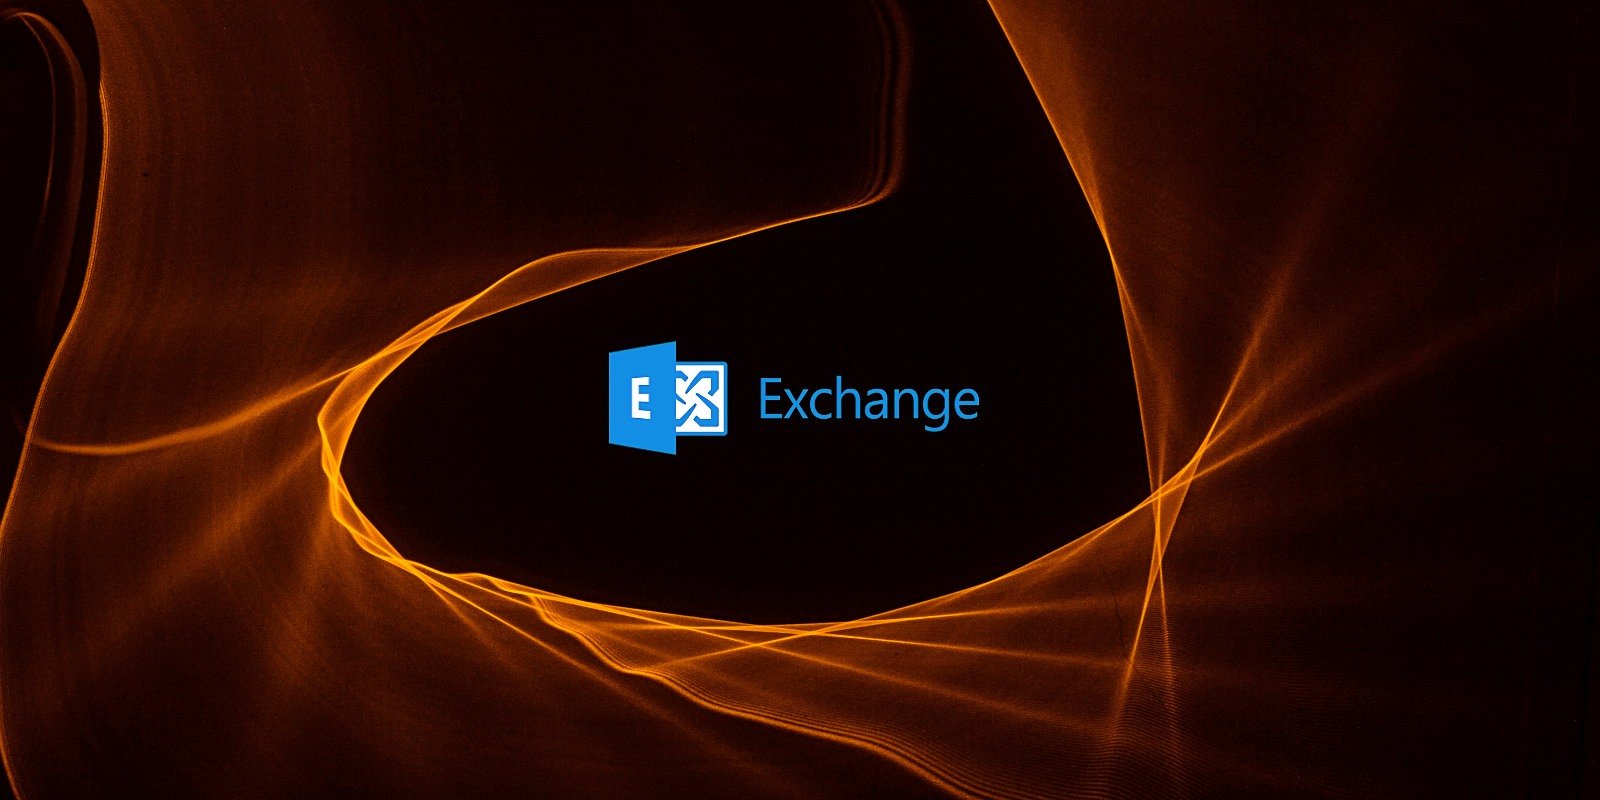 Microsoft: 92% of Exchange servers safe from ProxyLogon attacks